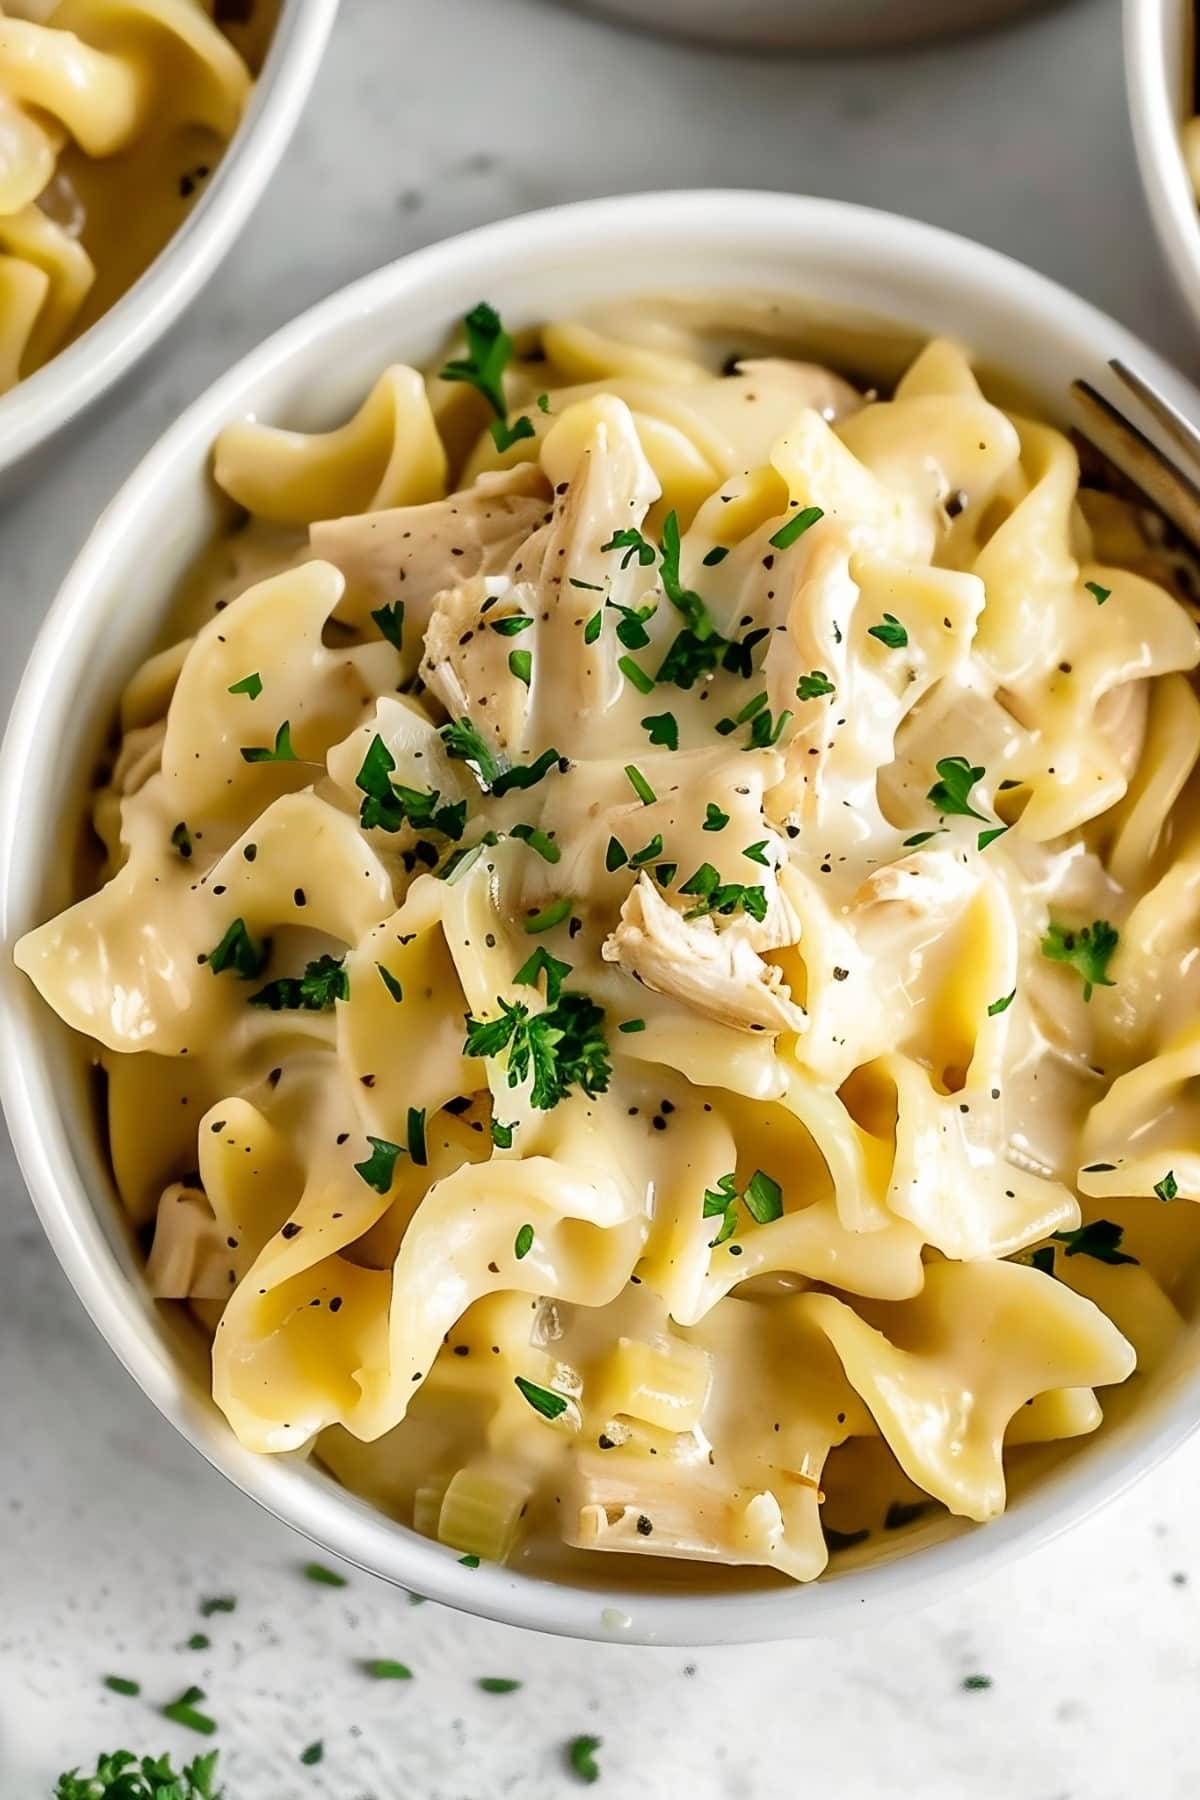 Juicy and creamy homemade chicken and noodles